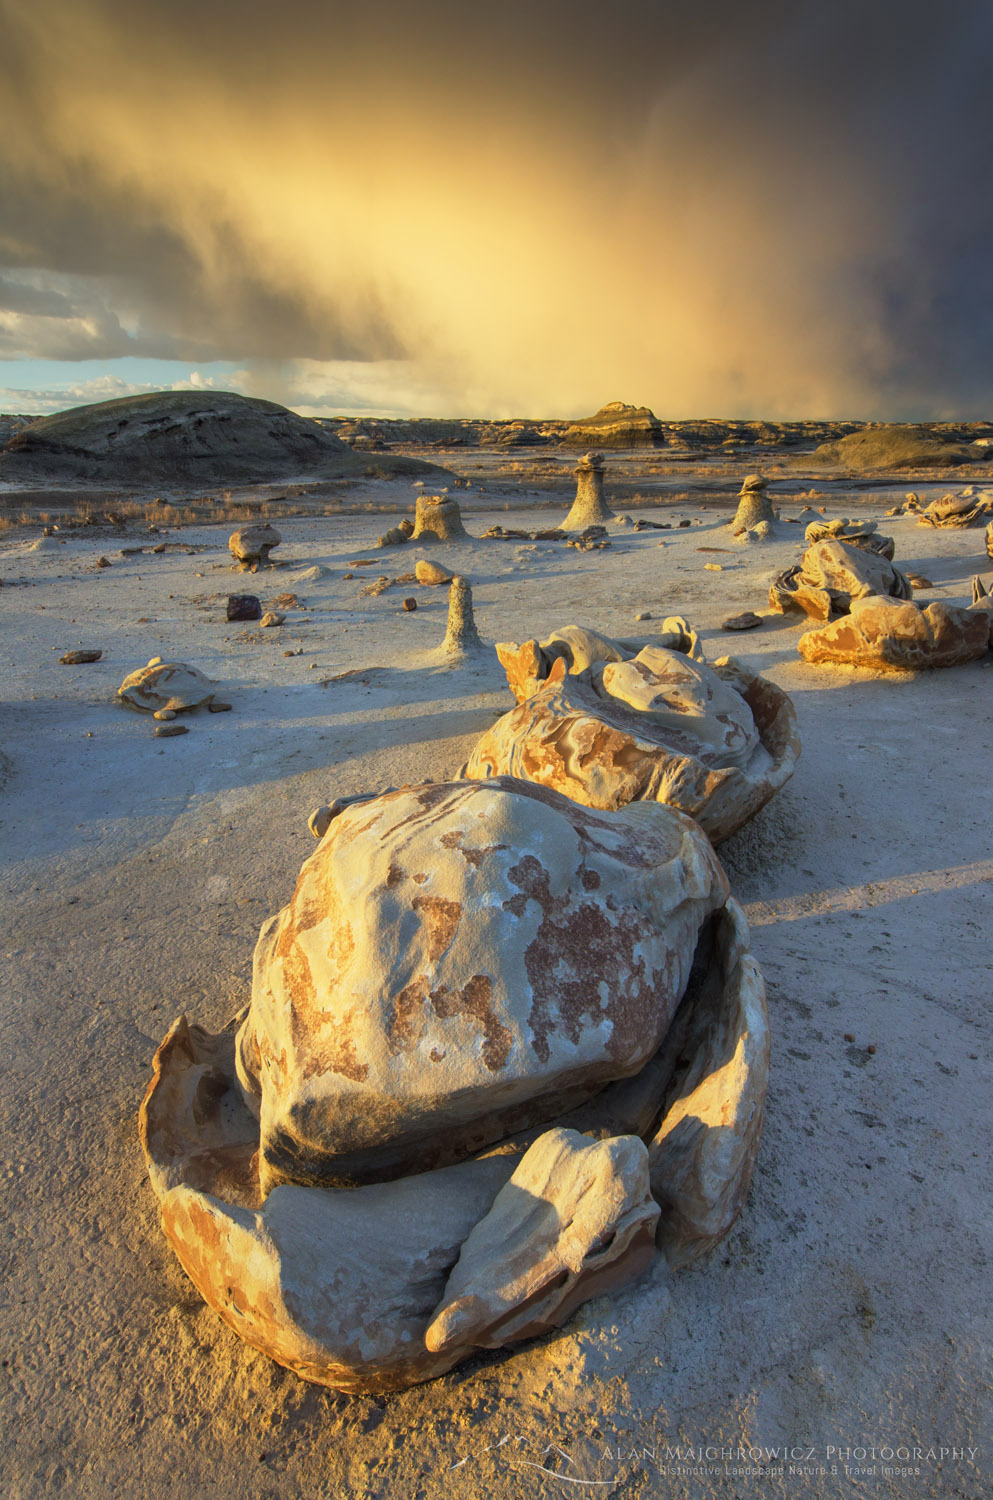 Approaching storm at the "Egg Factory" sandstone formations, Bisti Badlands, Bisti/De-Na-Zin Wilderness, New Mexico #57392